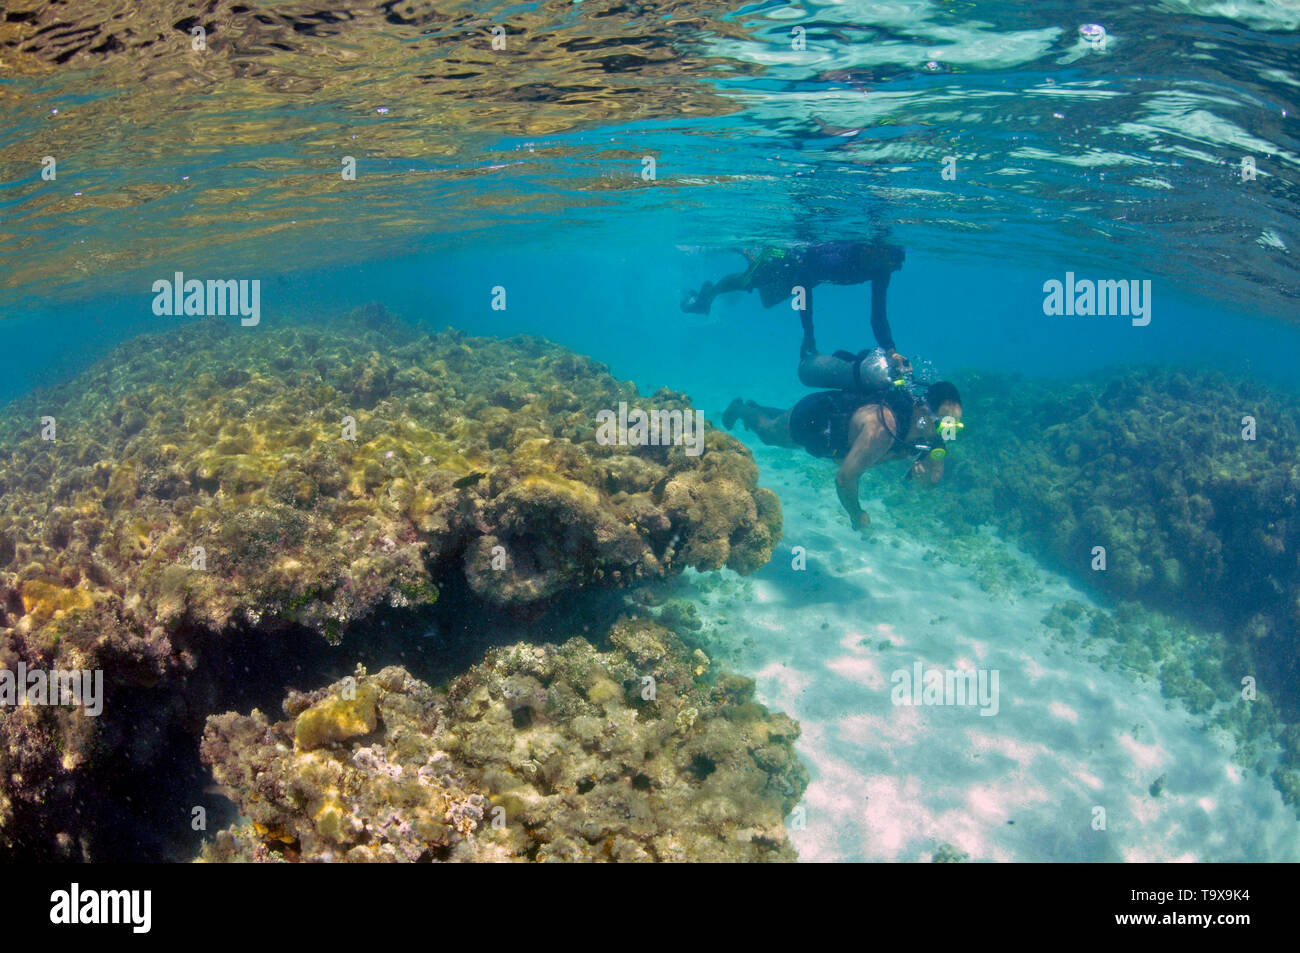 Scuba dive assisted by snorkeling guide in the dead coral reef of the Natural Pools or 'Gales', Maragogi, Alagoas, Brazil Stock Photo